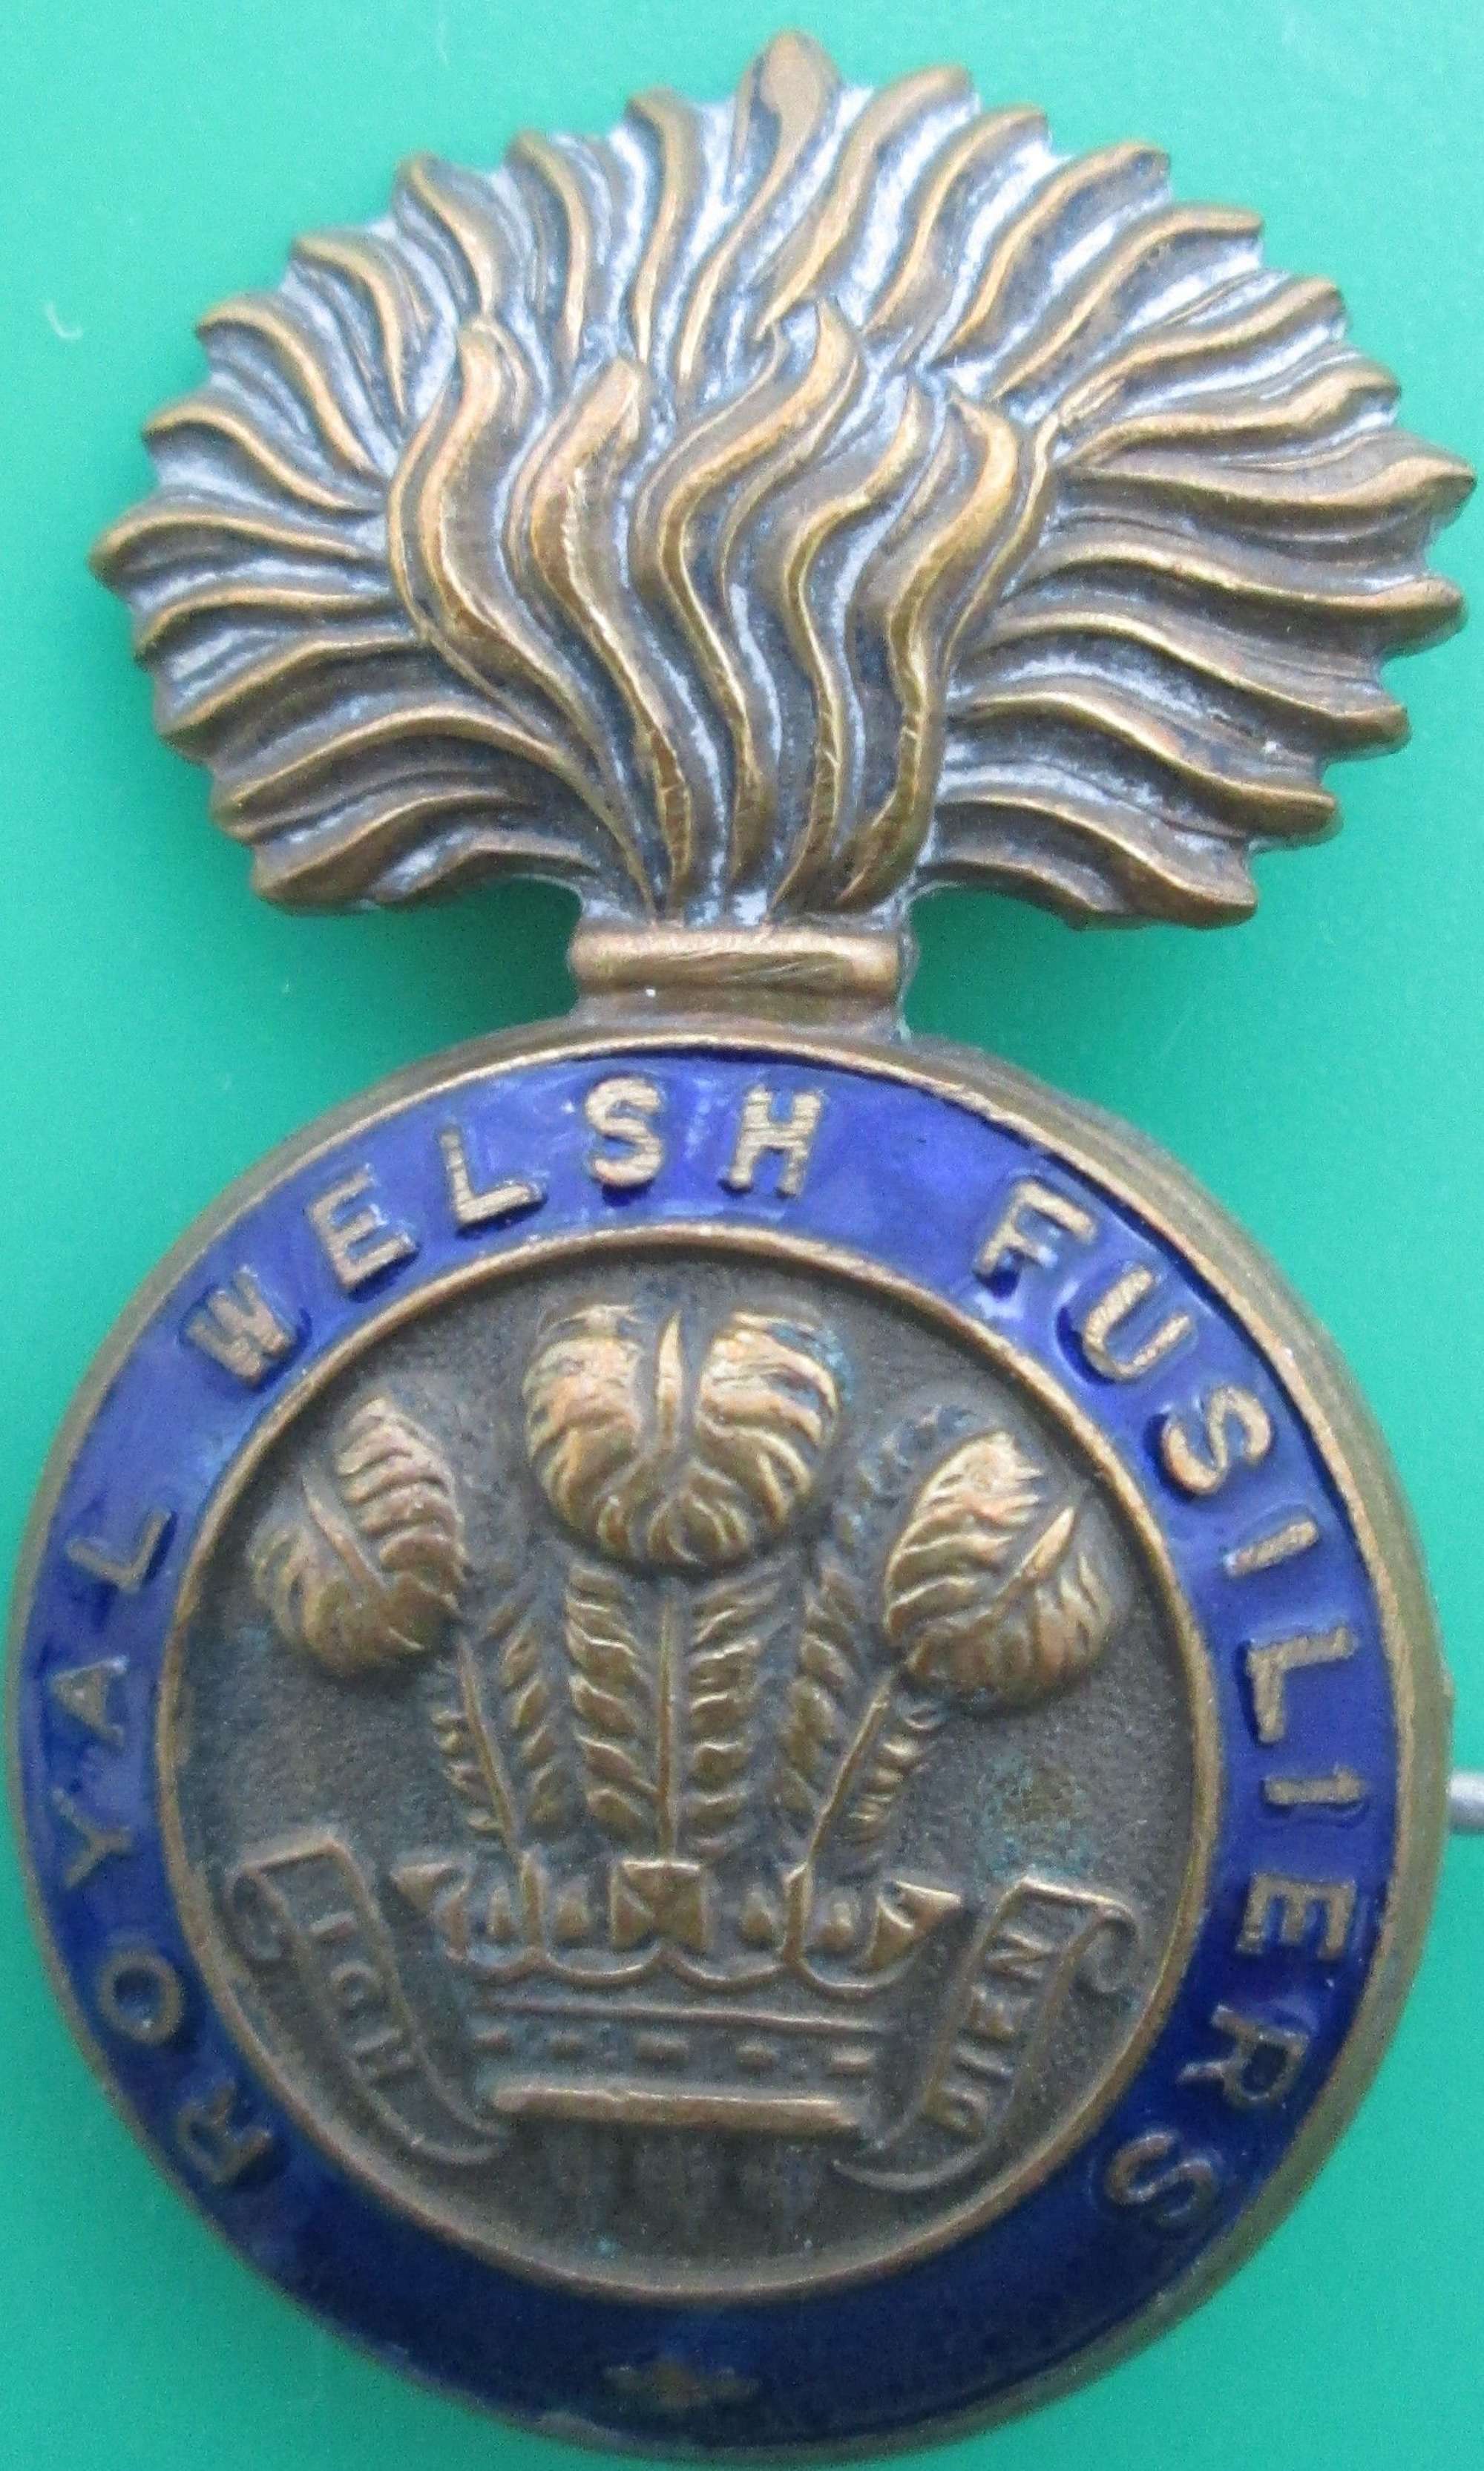 A ROYAL WELSH FUSILIERS PIN BROOCH